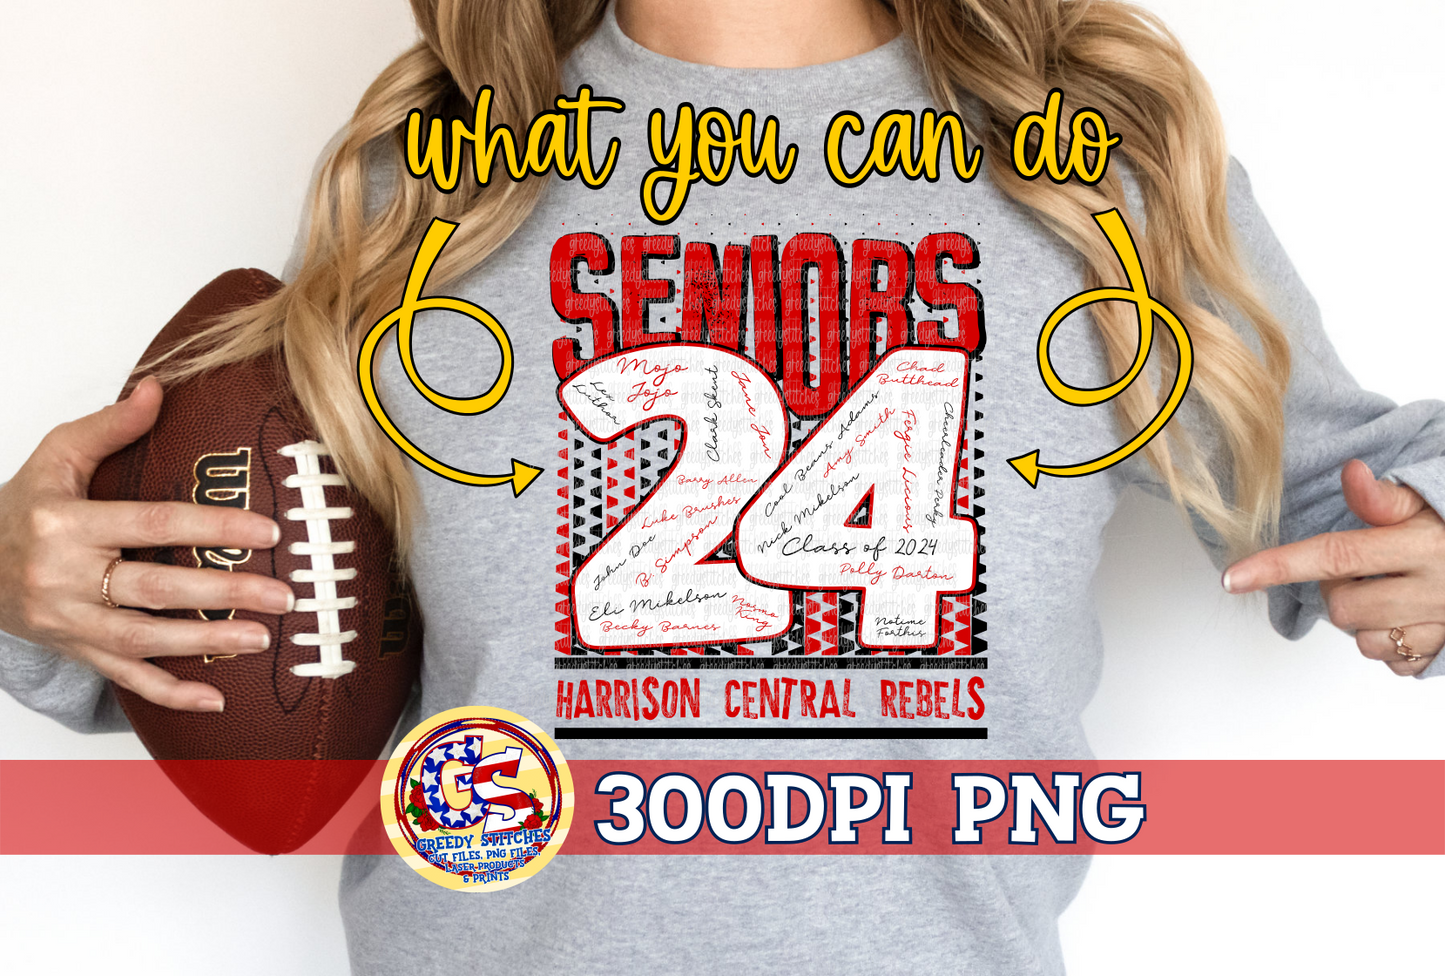 Seniors 24 Royal Yellow PNG for Sublimation